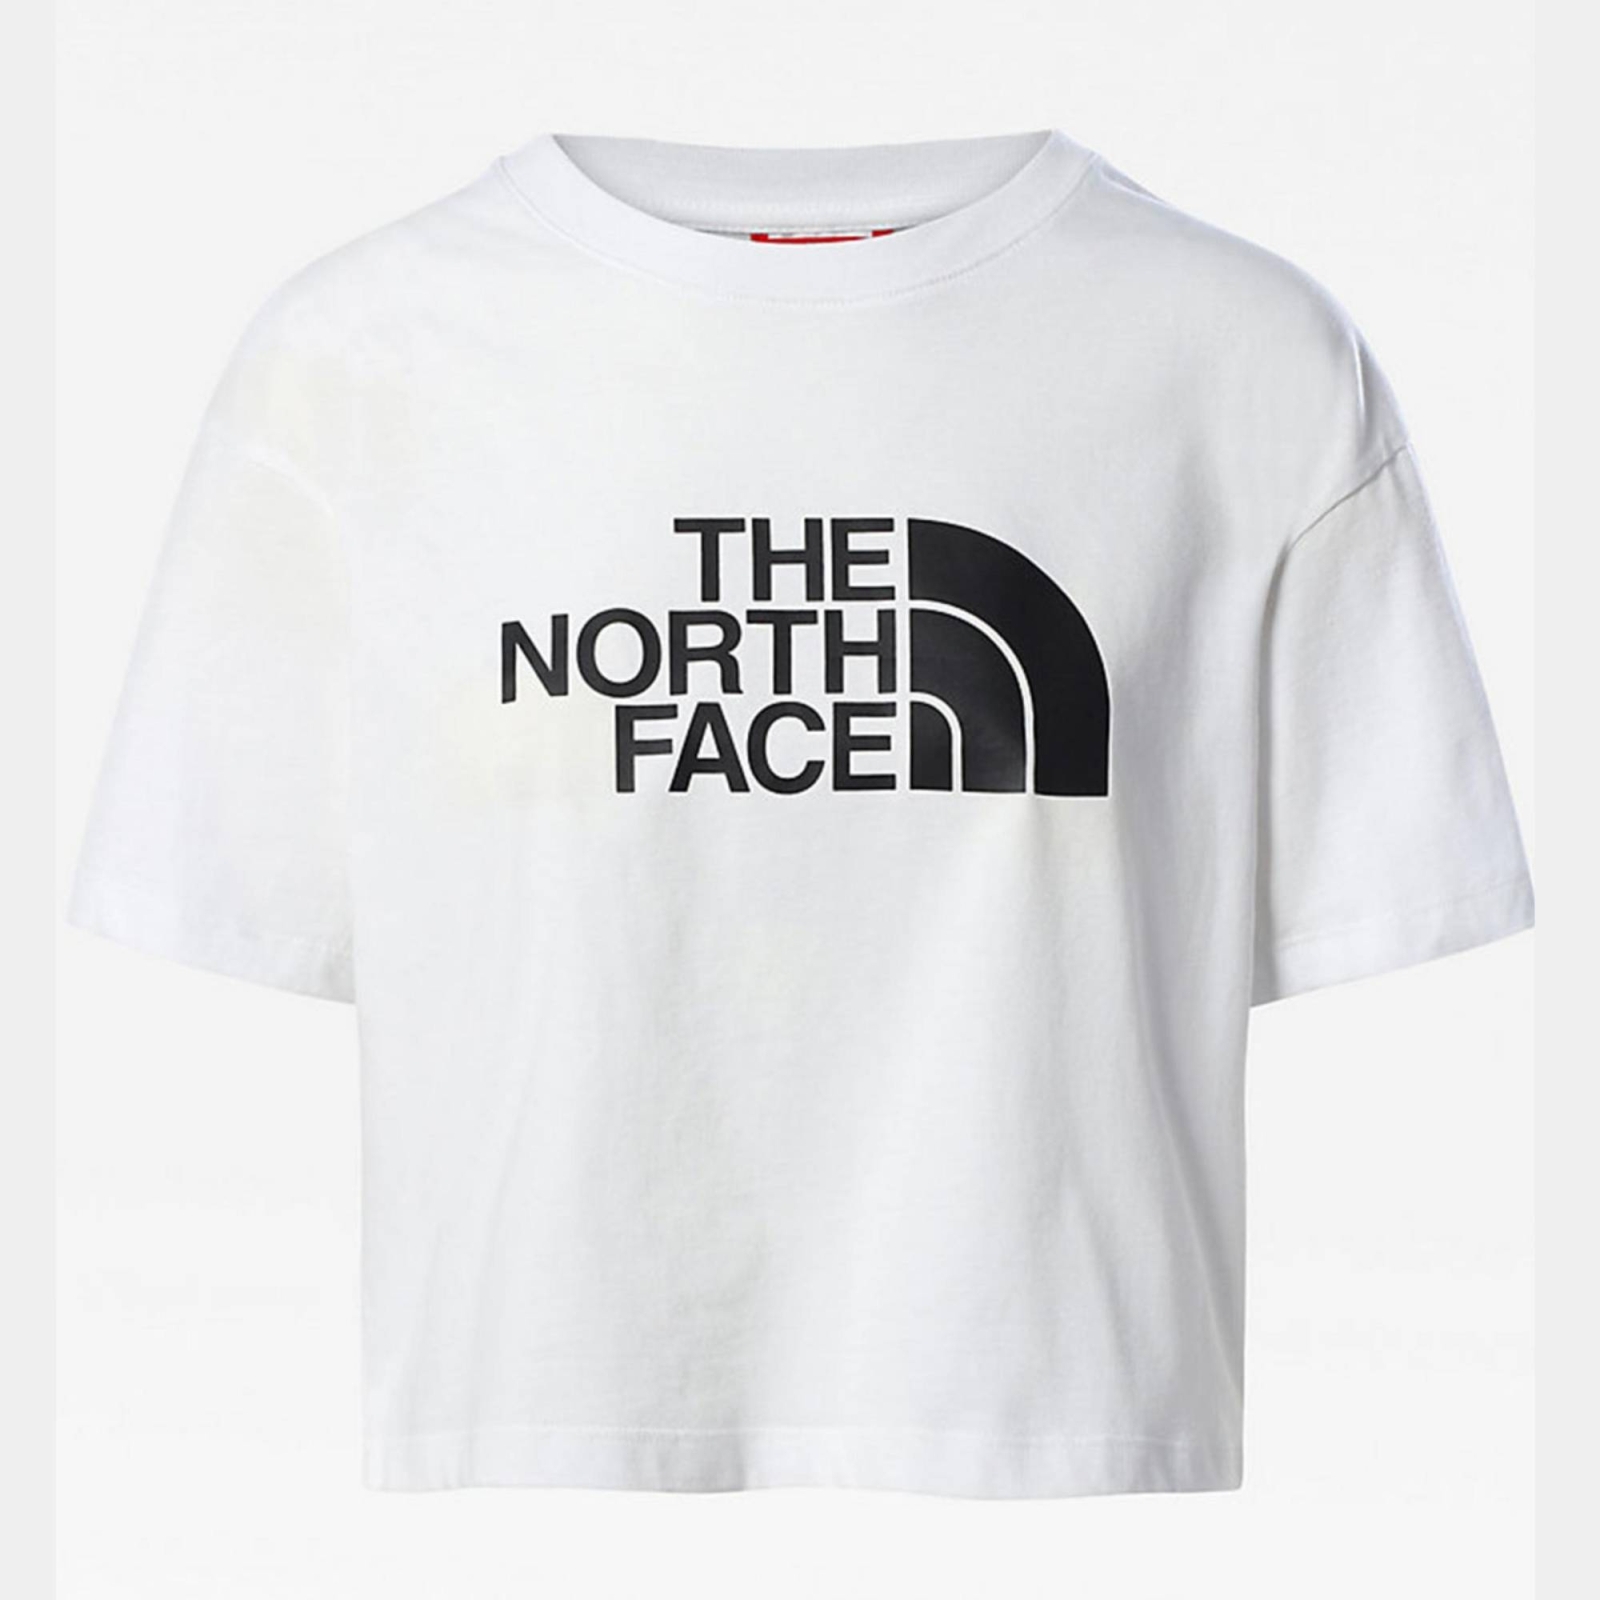 THE NORTHFACE WOMENS CROPPED EASY TEE